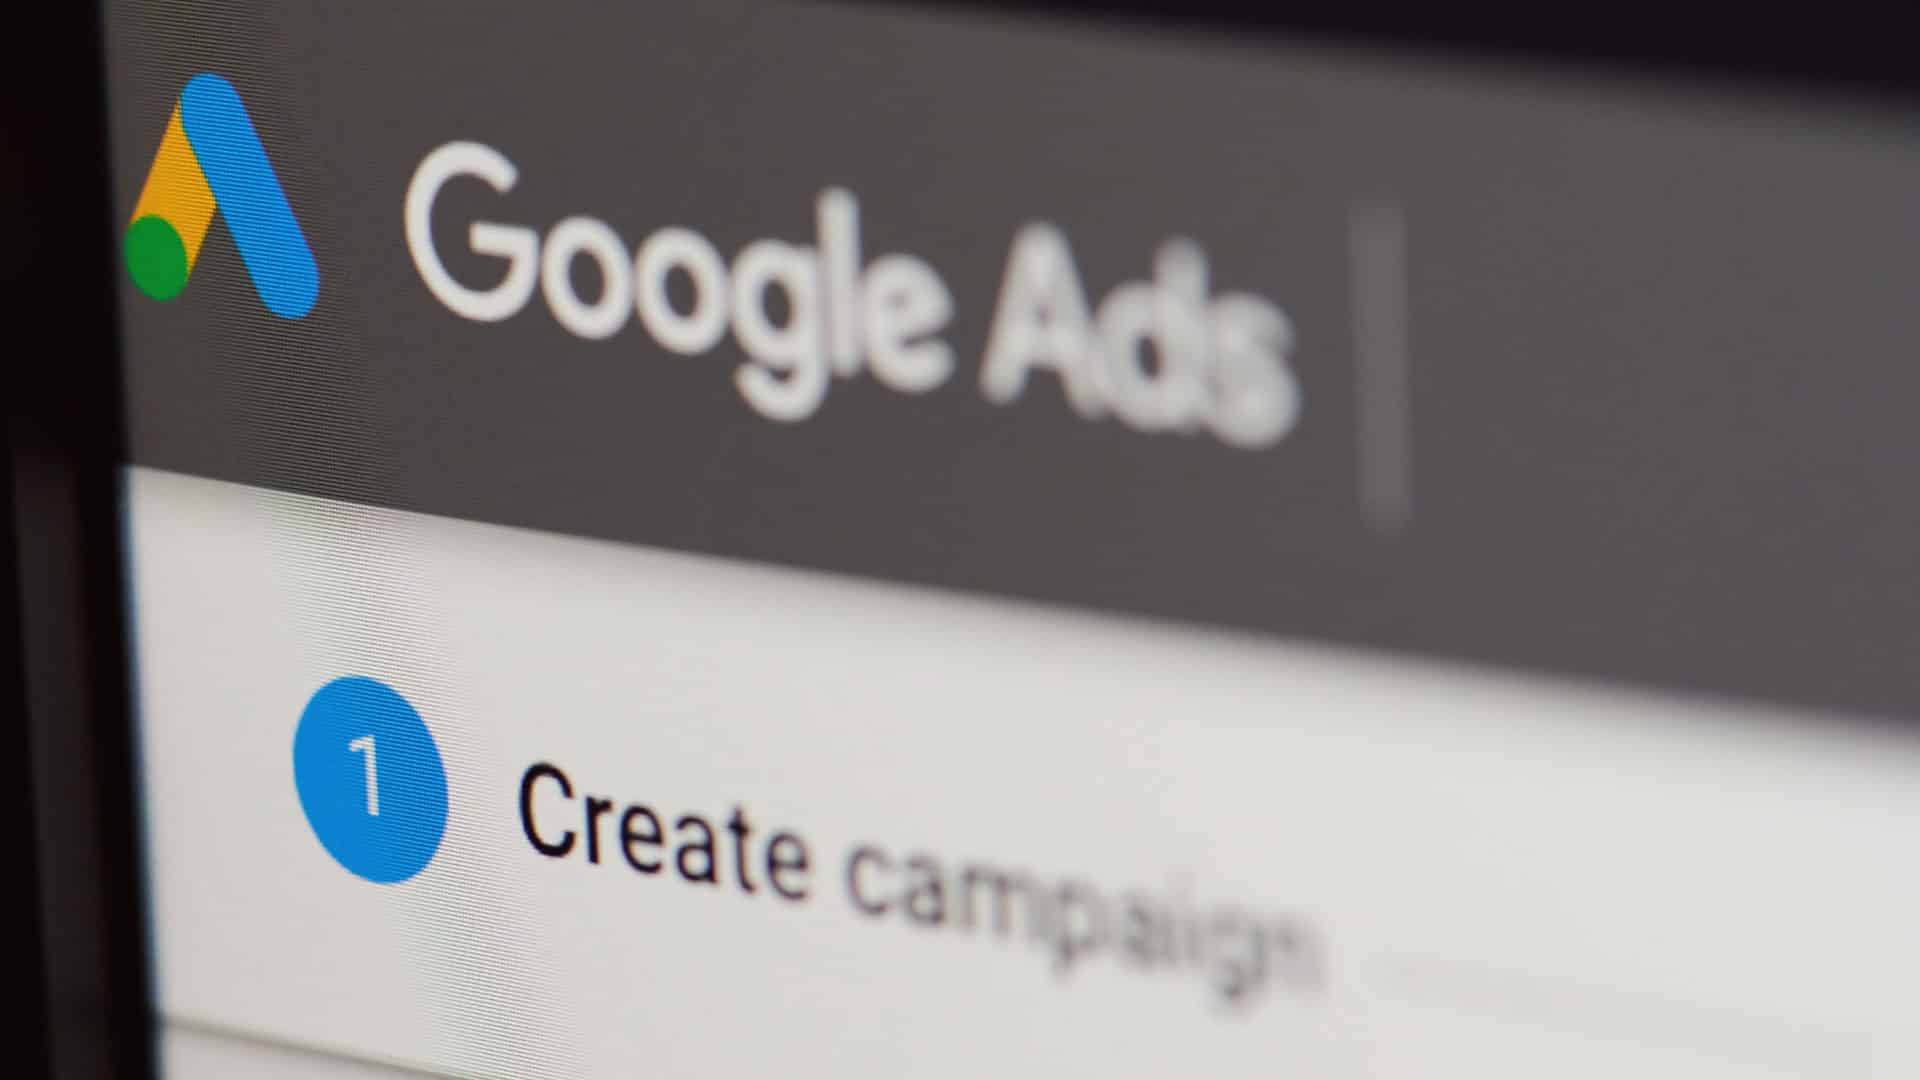 use blog to turn traffic into leads - the page for Google Ads